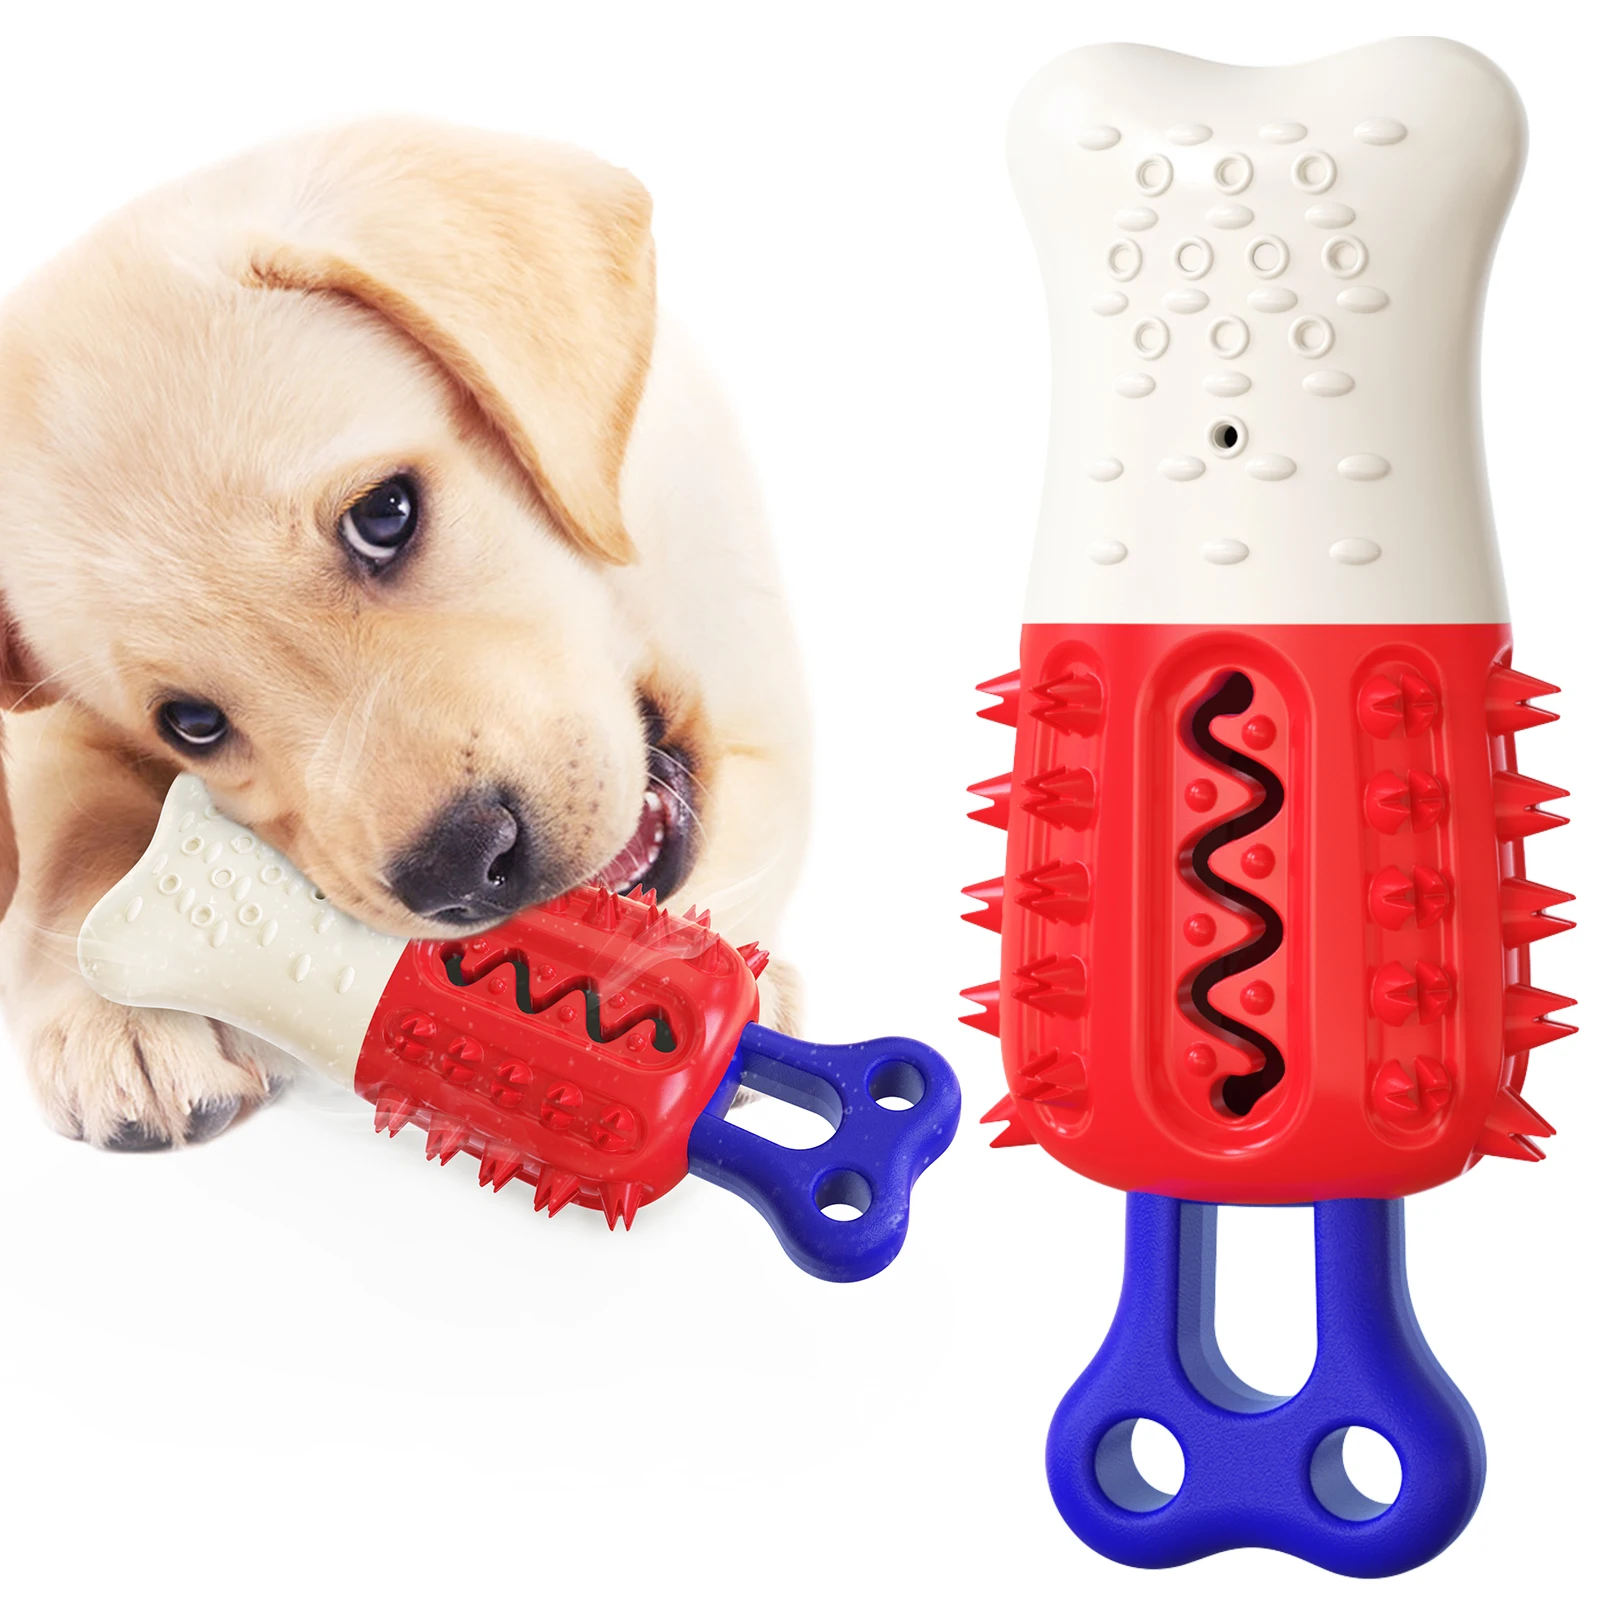 Cool Pup Cooling Toy Popsicle Orange